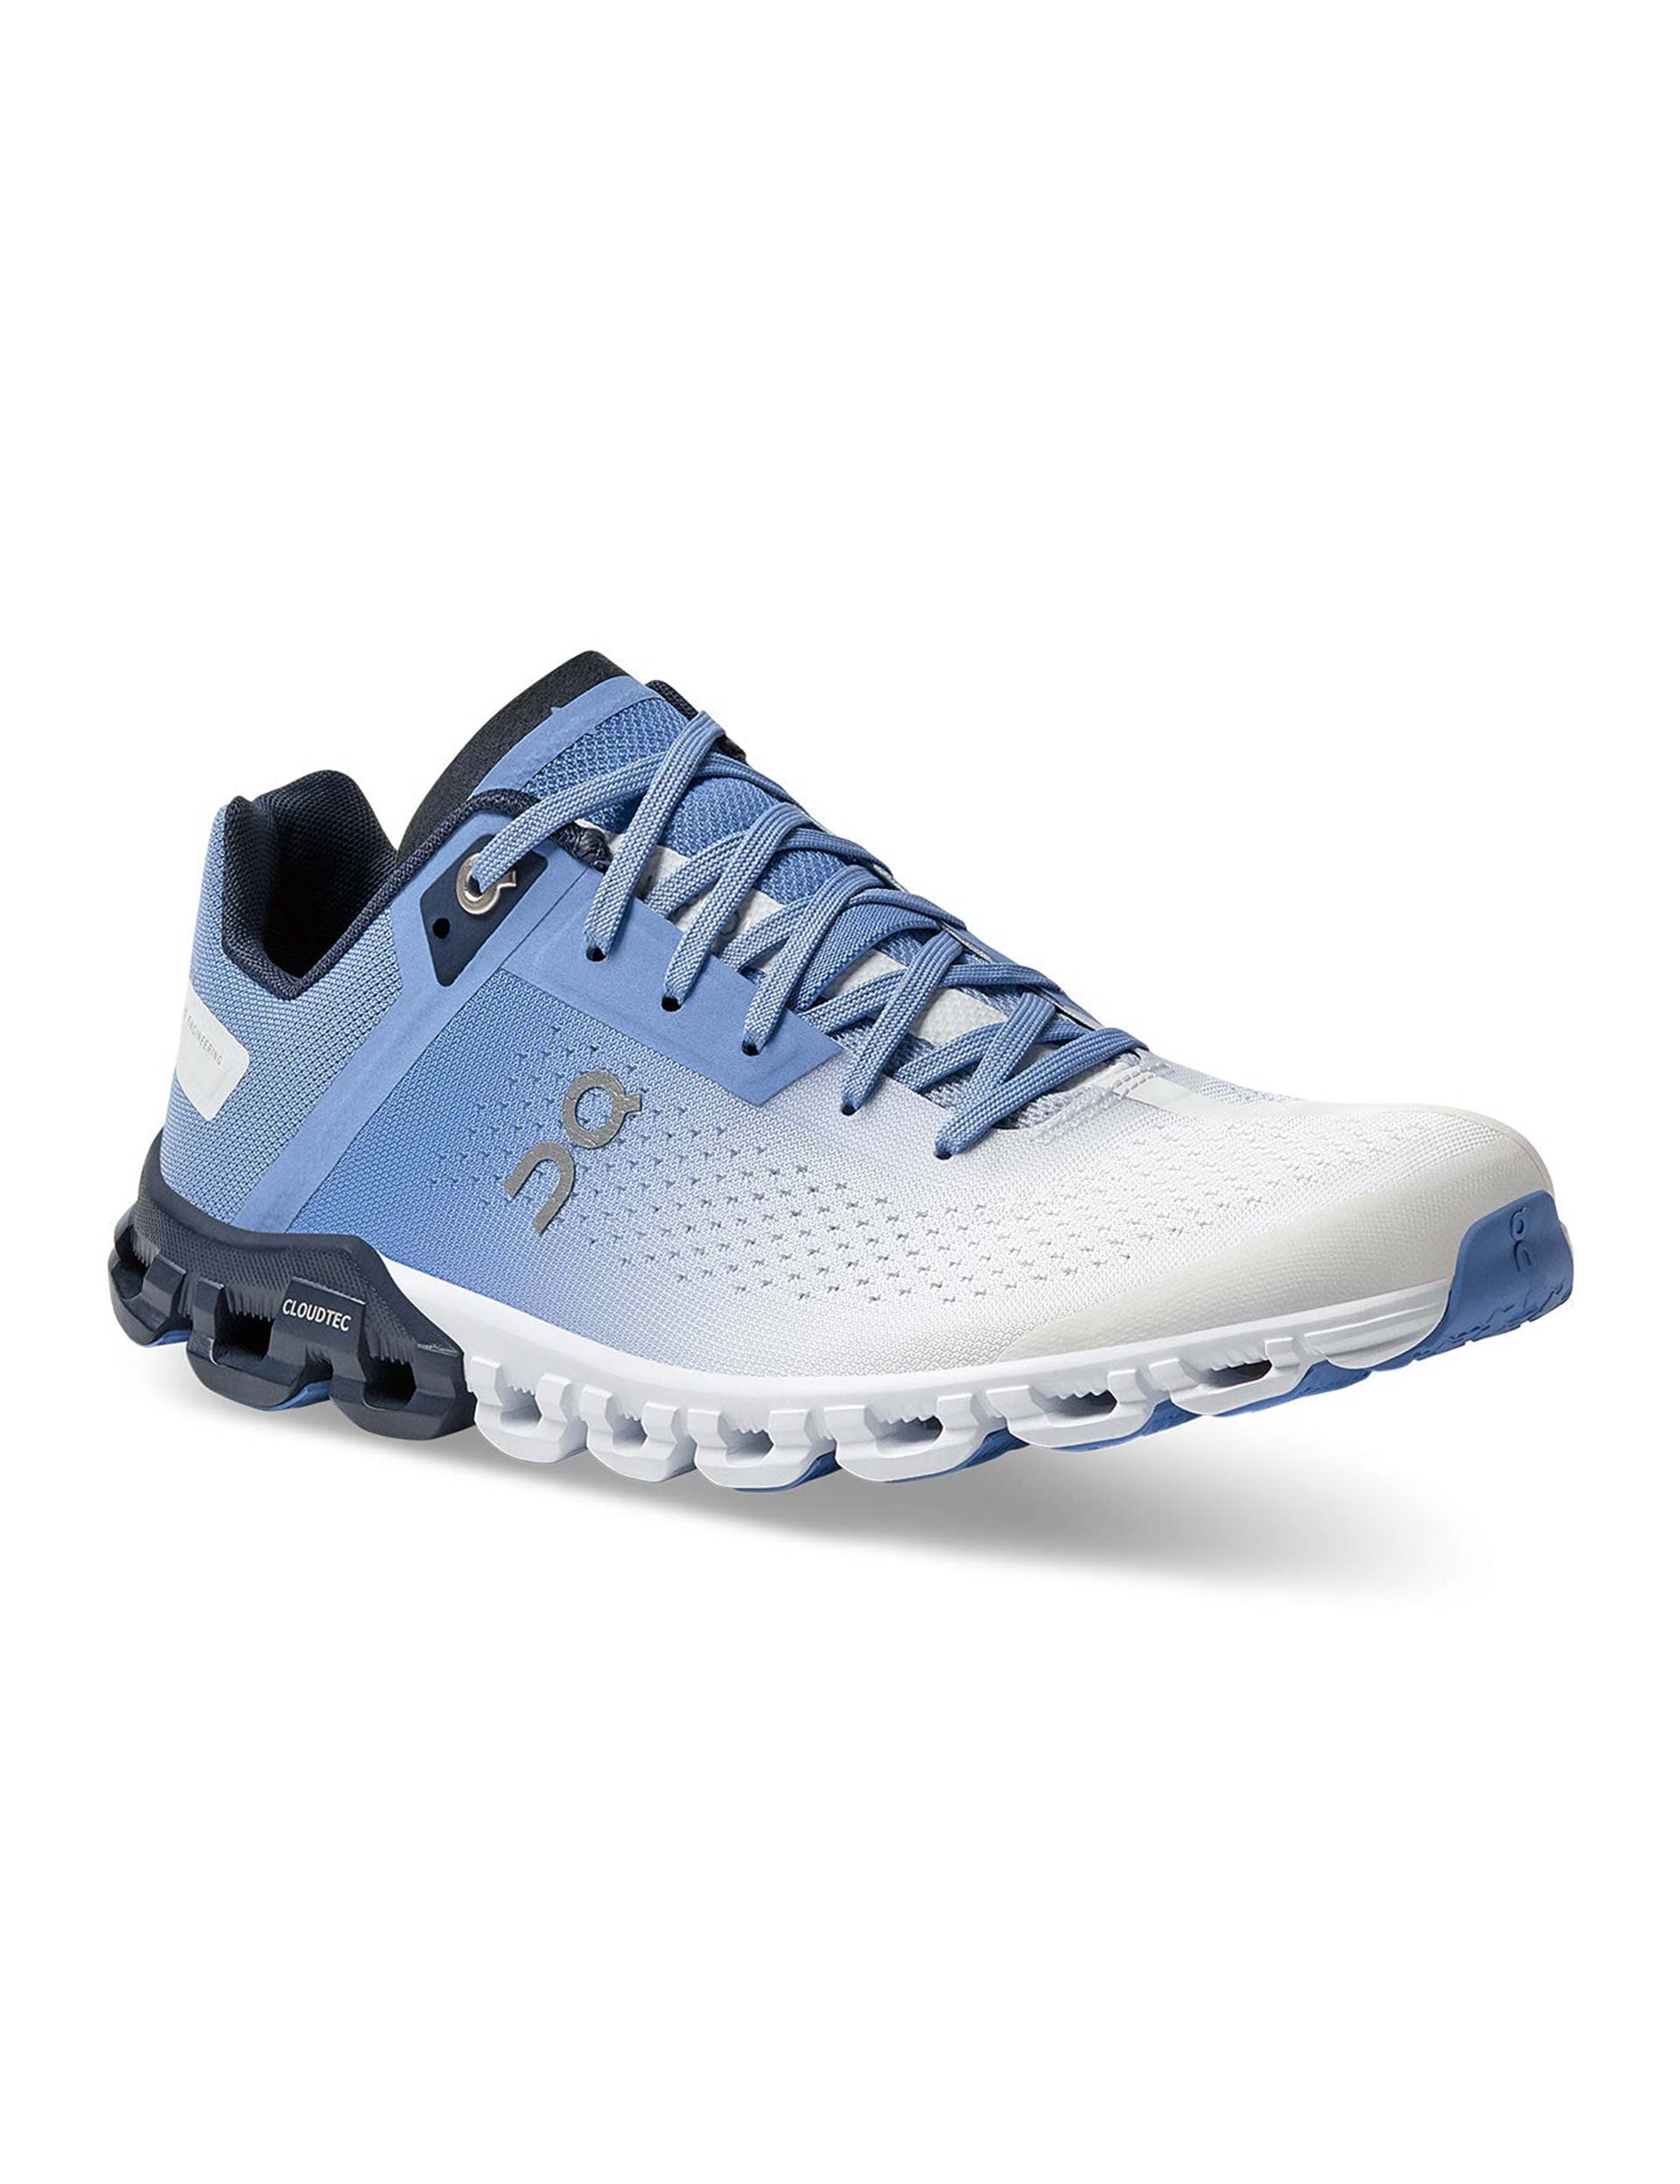 ON Running Cloudflow 3.0 - Marina/White | Women'simages2- The Sports Edit